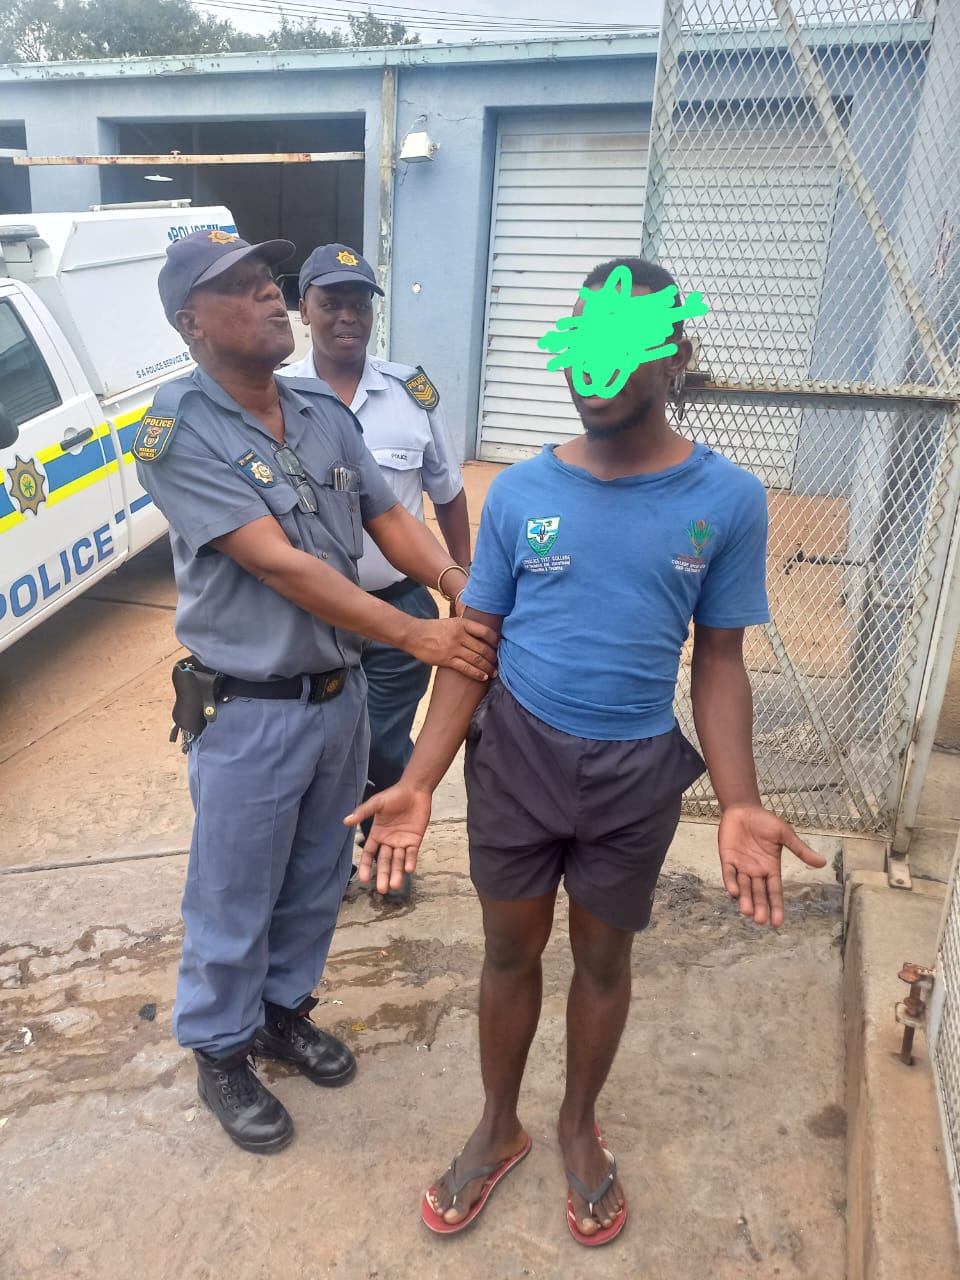 POLICE ROOT OUT ILLEGAL FIREARMS IN SEKHUKHUNE AND ARREST FIVE SUSPECTS